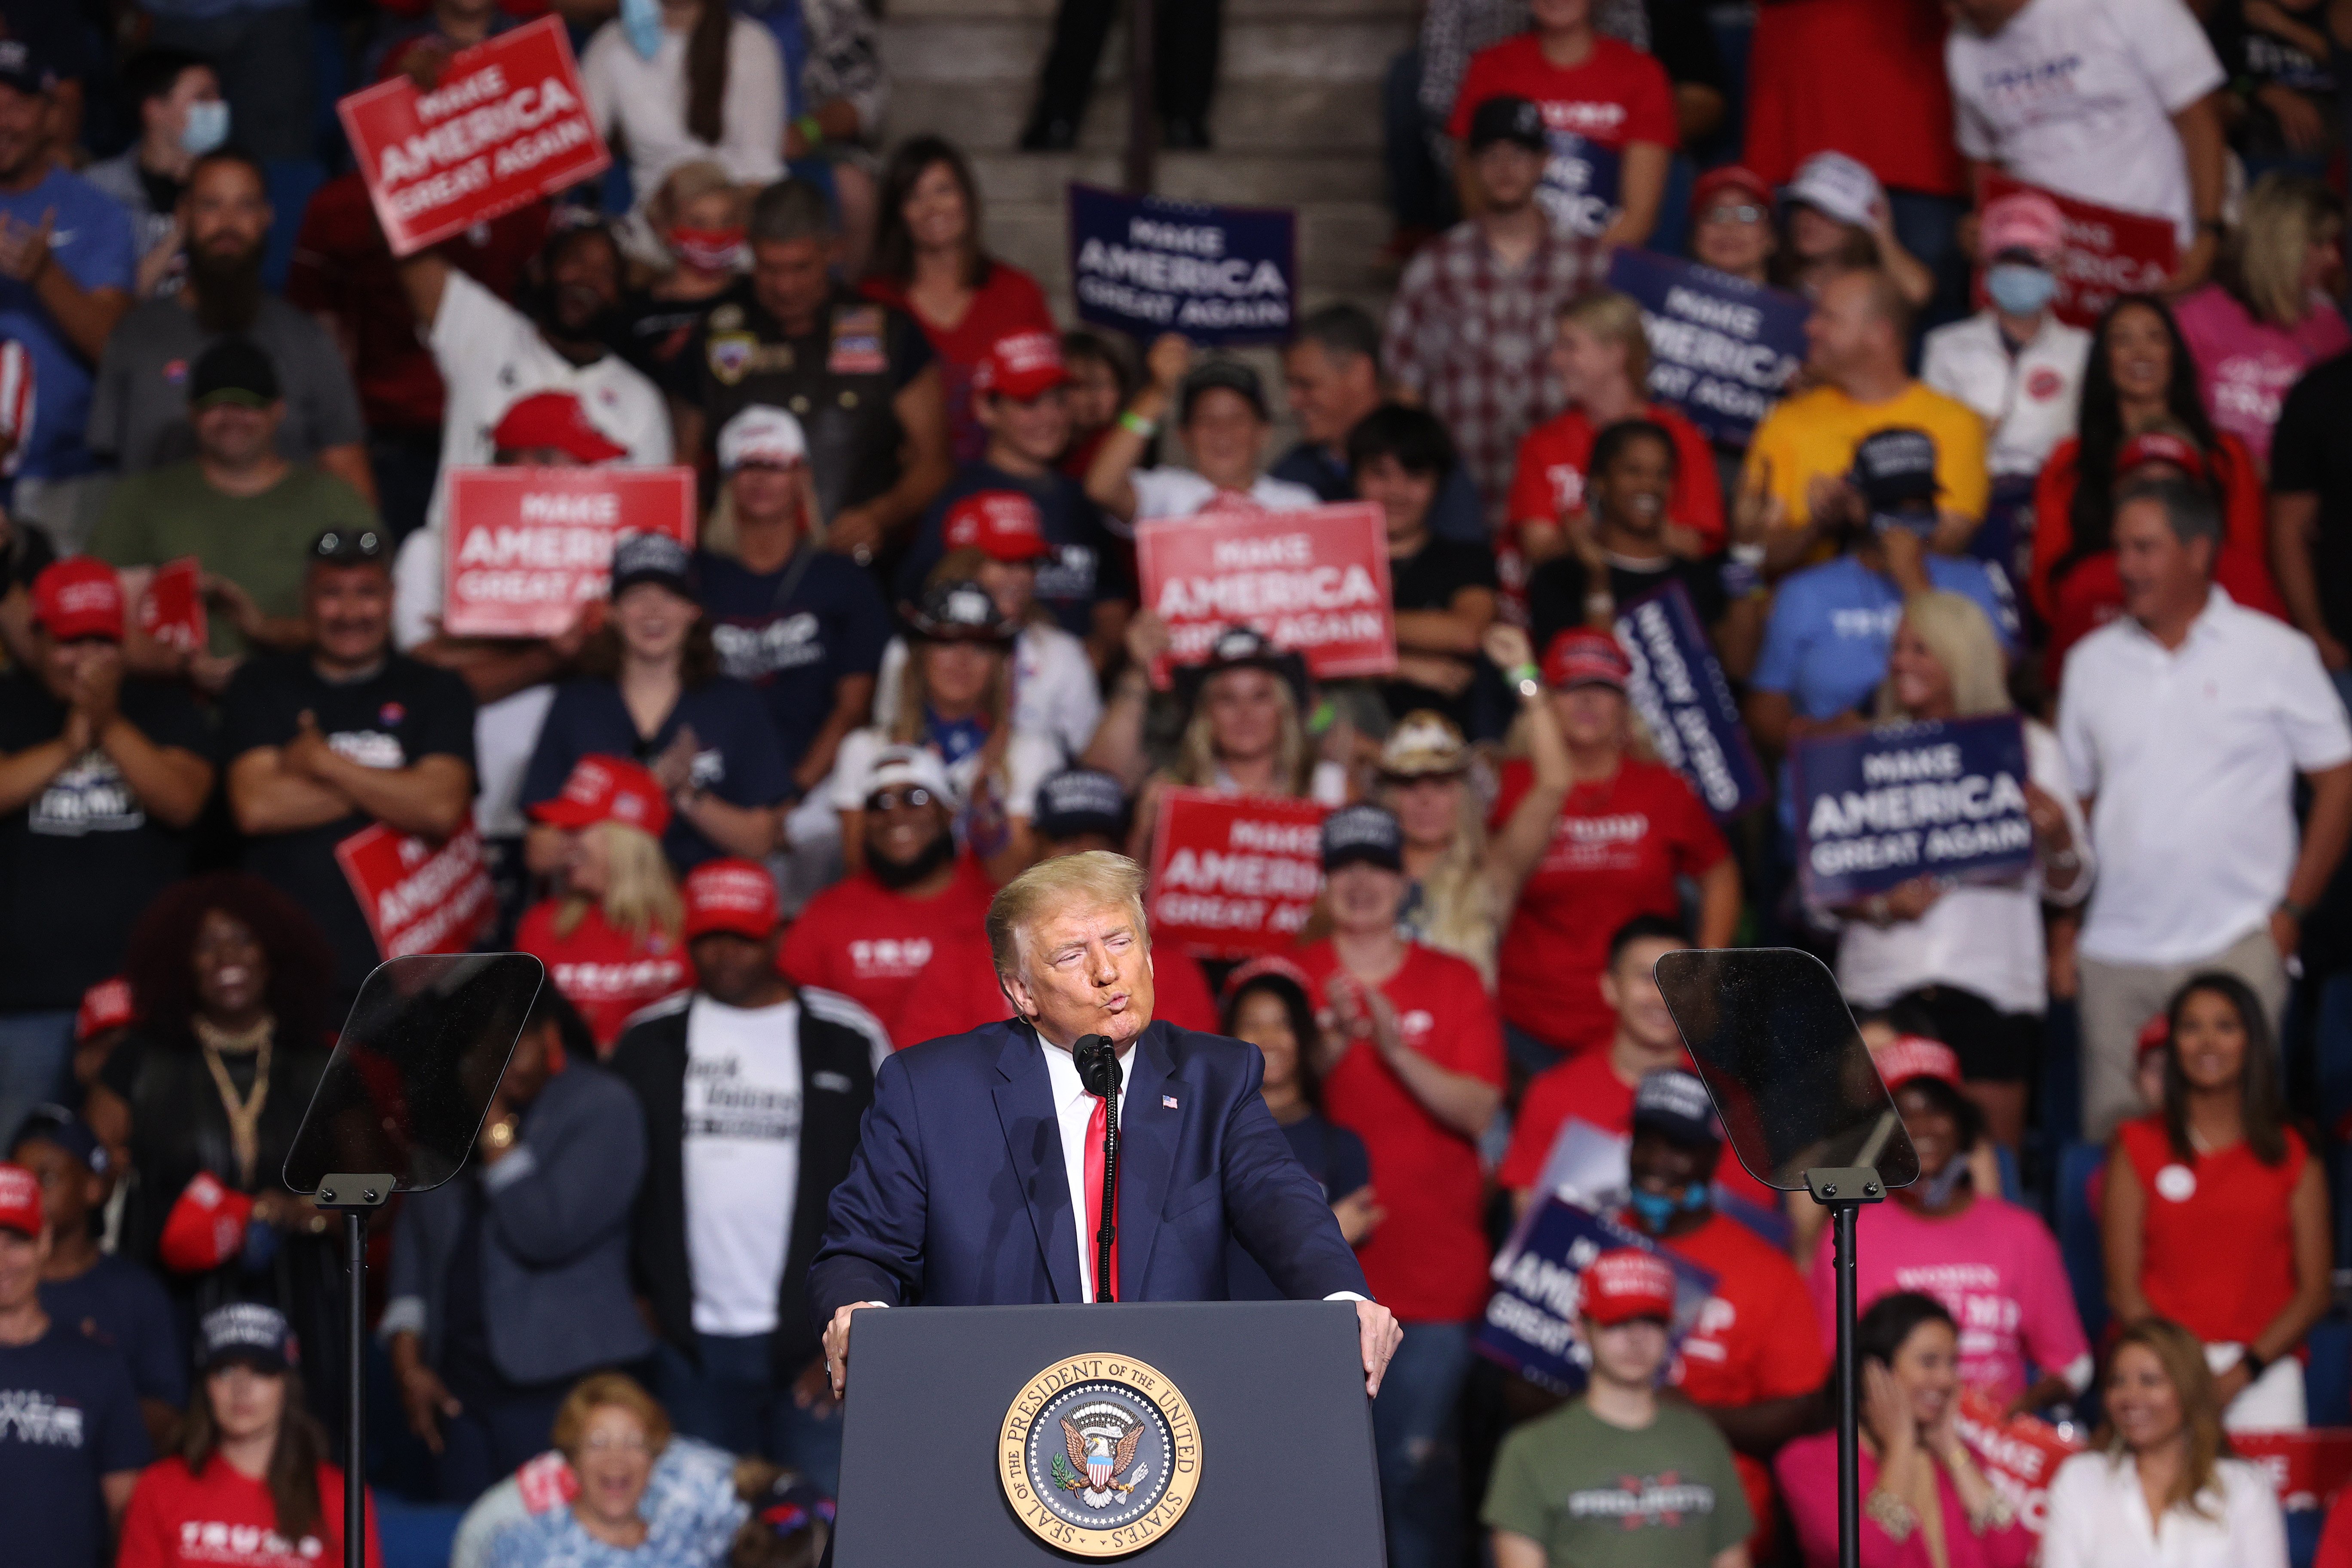 President Donald Trump speaks at a campaign rally at the BOK Center, June 20, 2020 in Tulsa, Oklahoma. (Photo: Win McNamee/Getty Images)